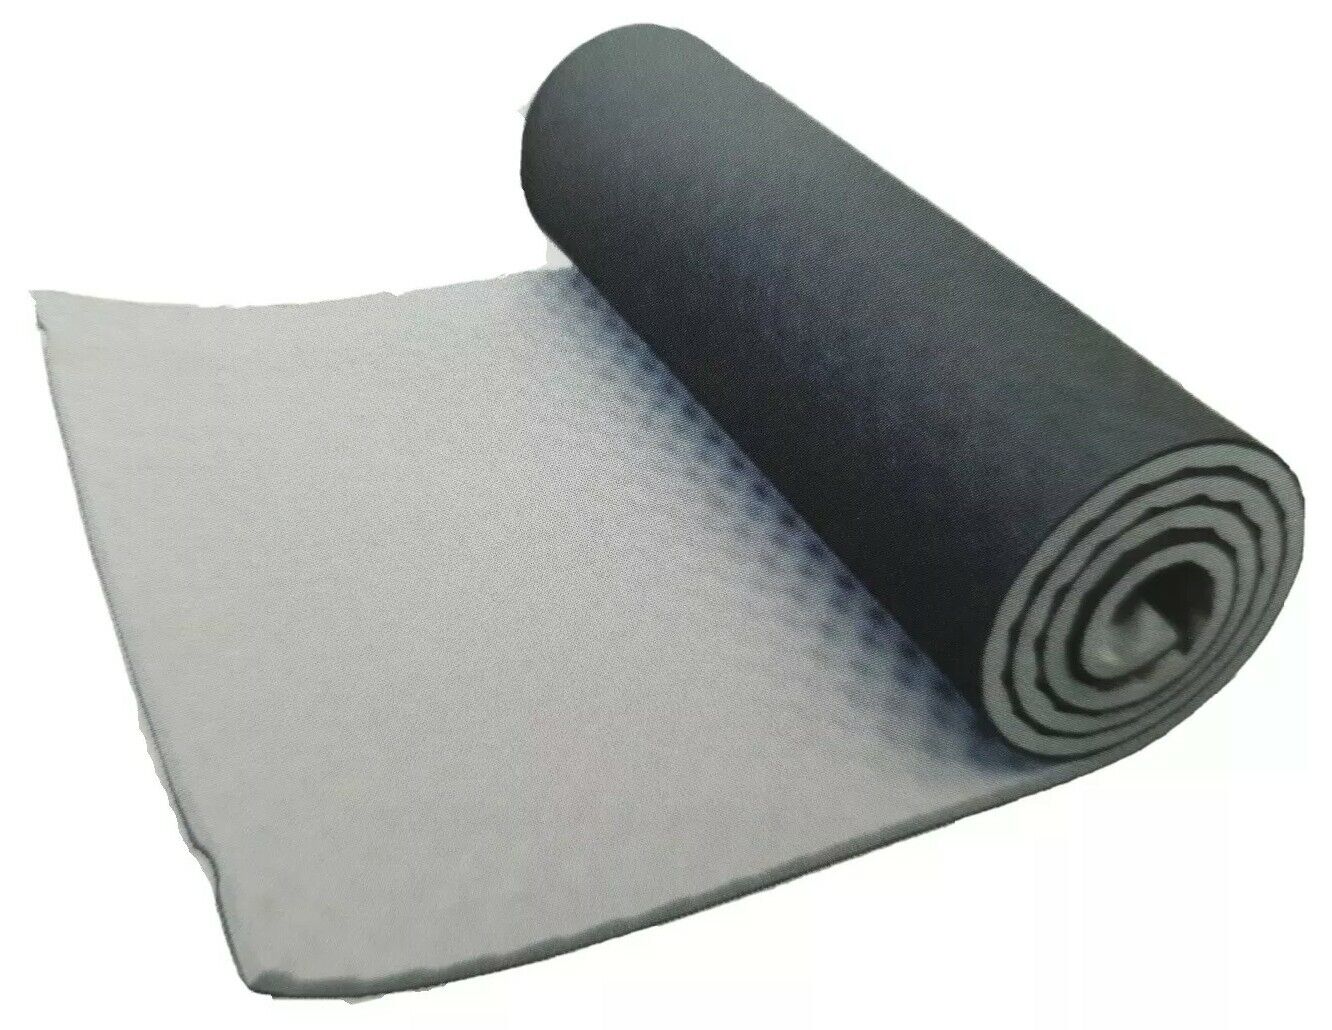 EVA WAVE SLEEPING MAT 14MM 180X50CM CAMPING MILITARY YOGA CADETS SCOUTS HIKING